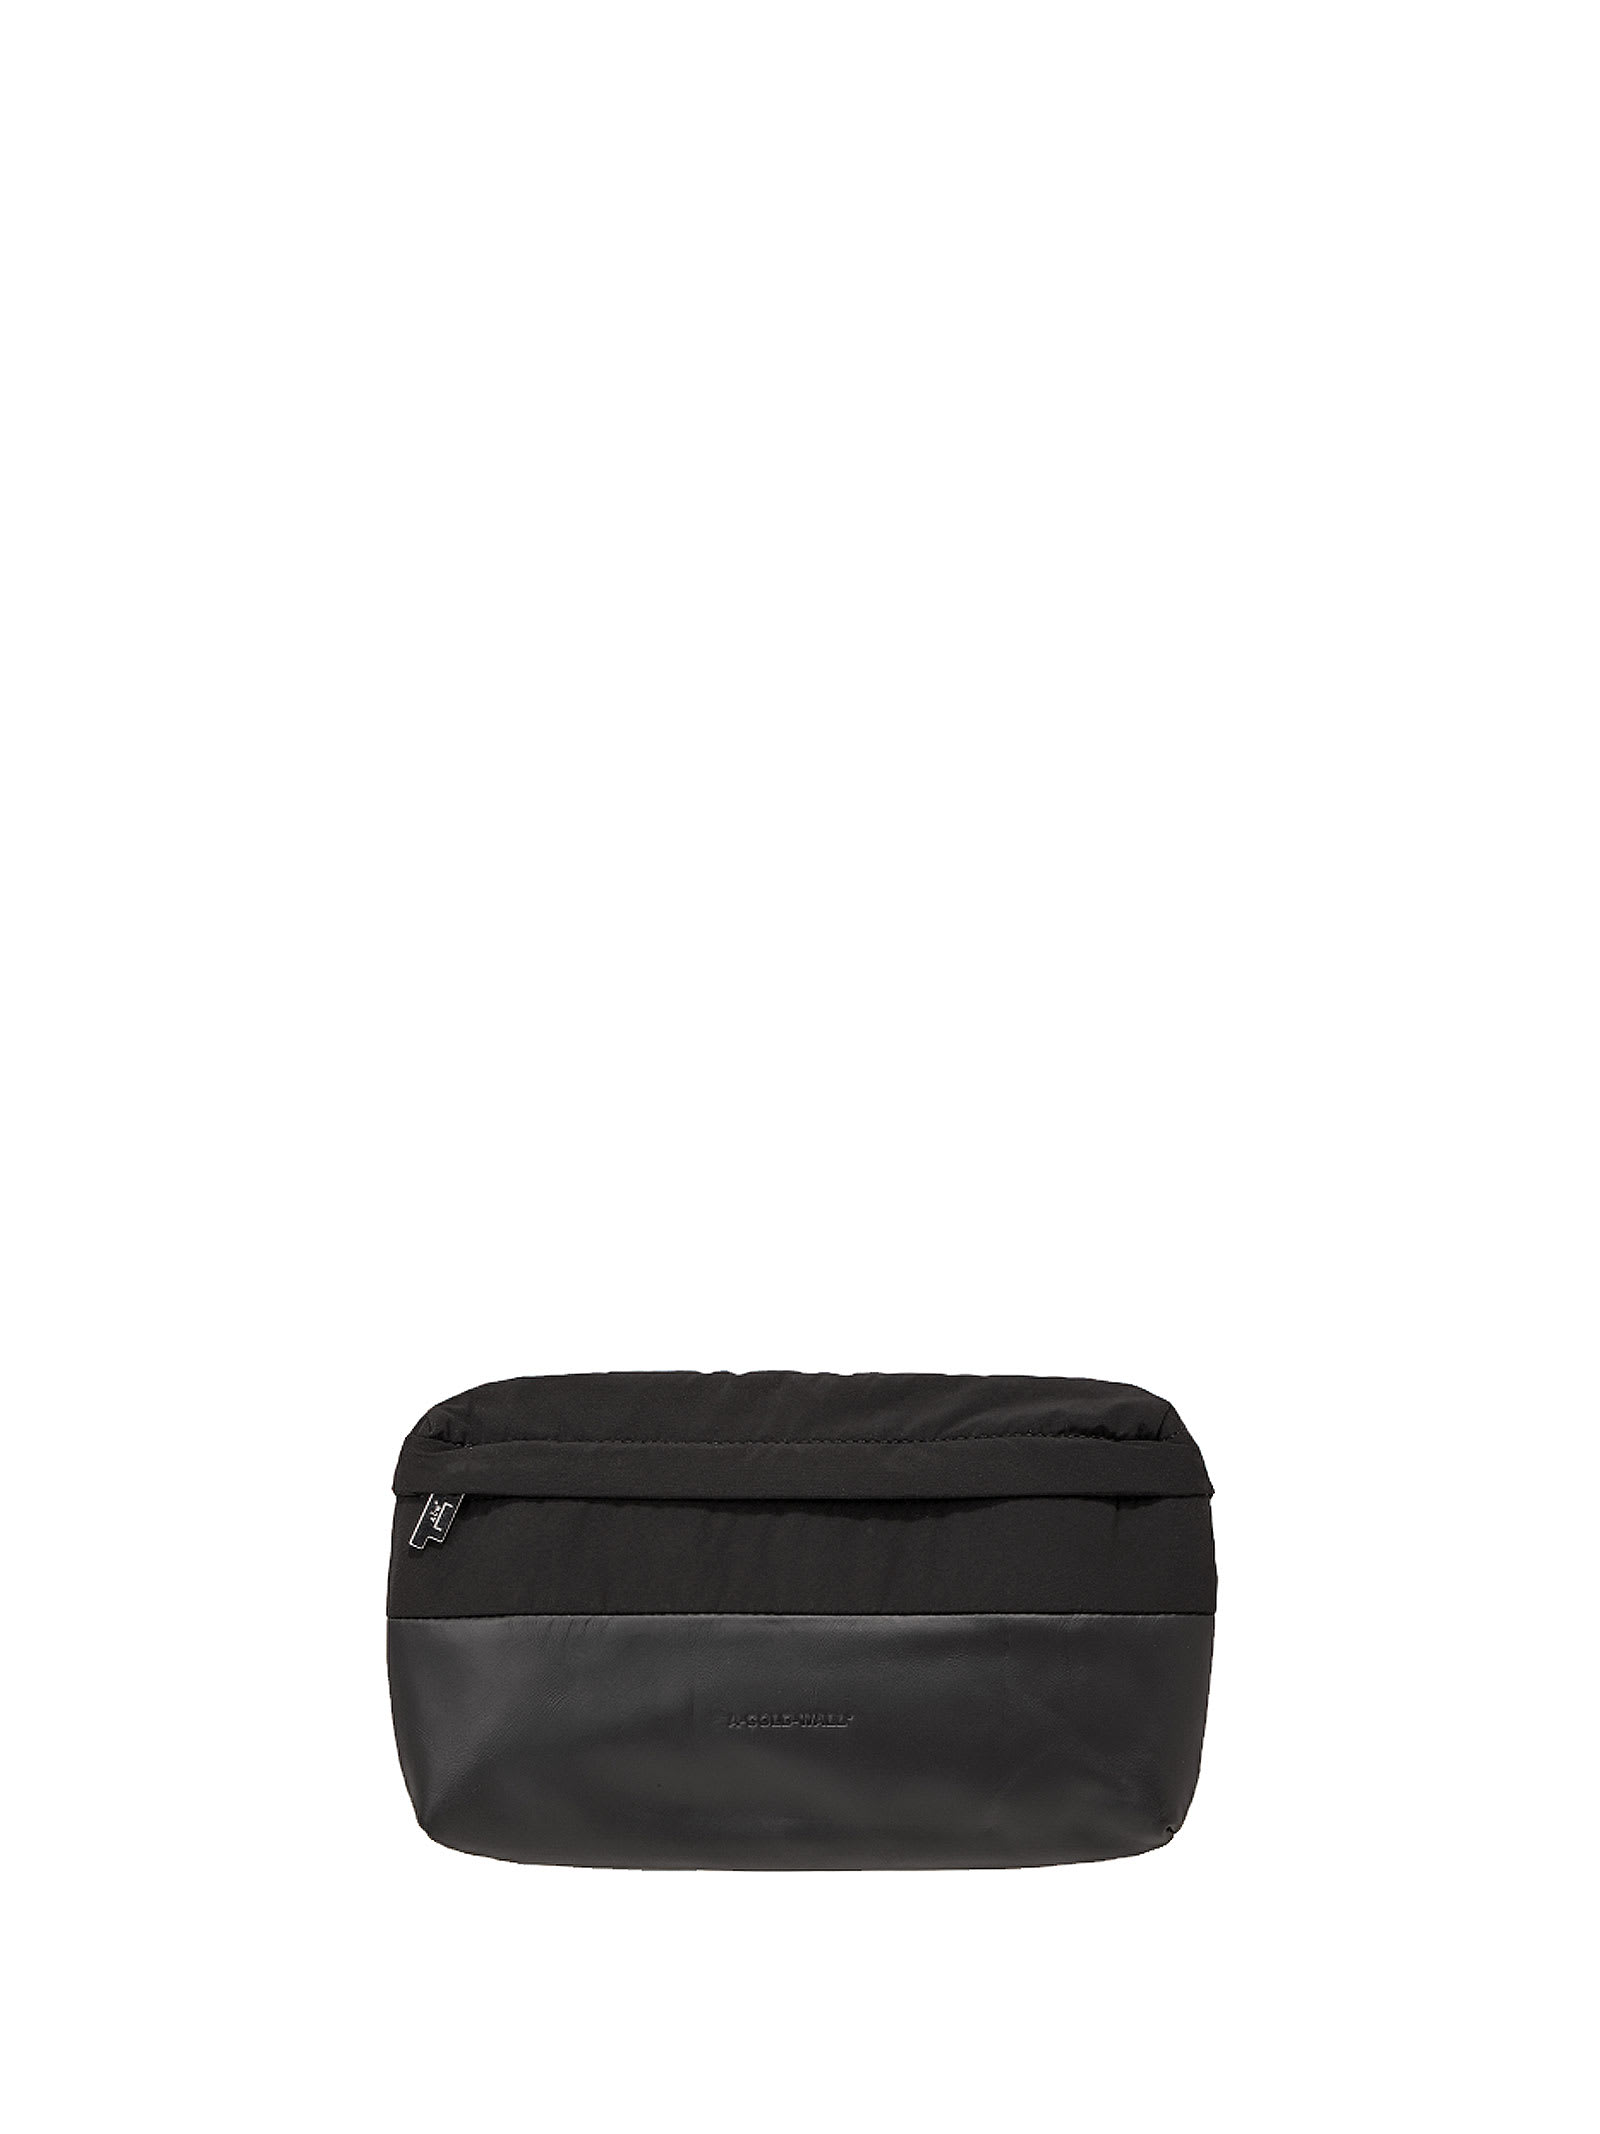 A-COLD-WALL Shoulder Bag In Black Leather